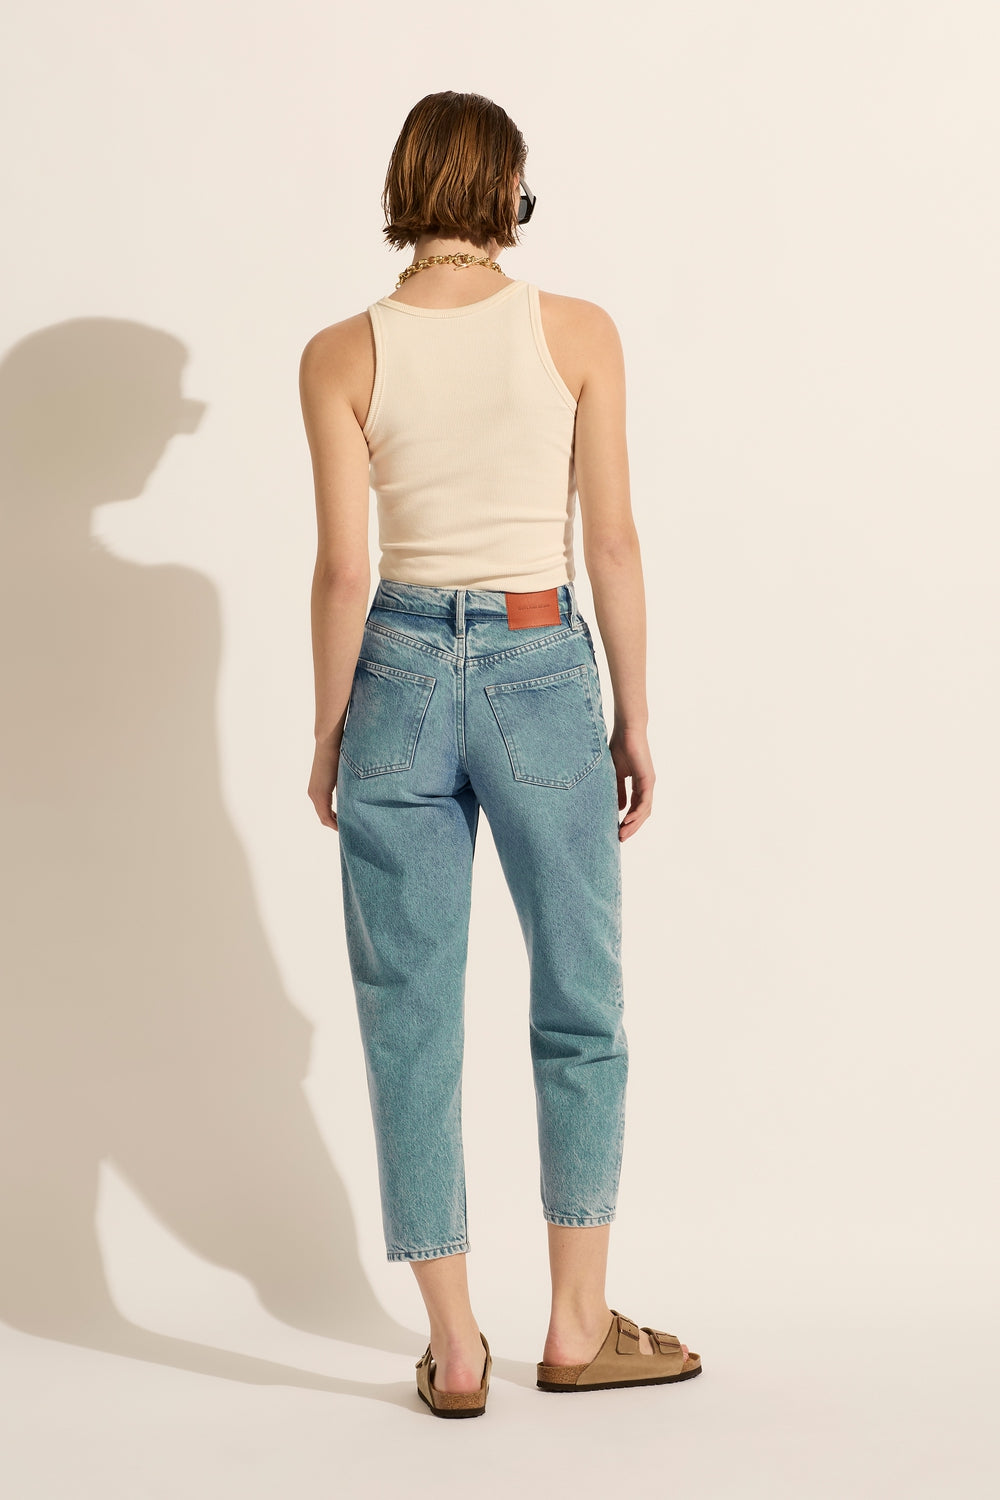 Buy Tuesday Low Rise Skinny Leg Jeans for CAD 104.00